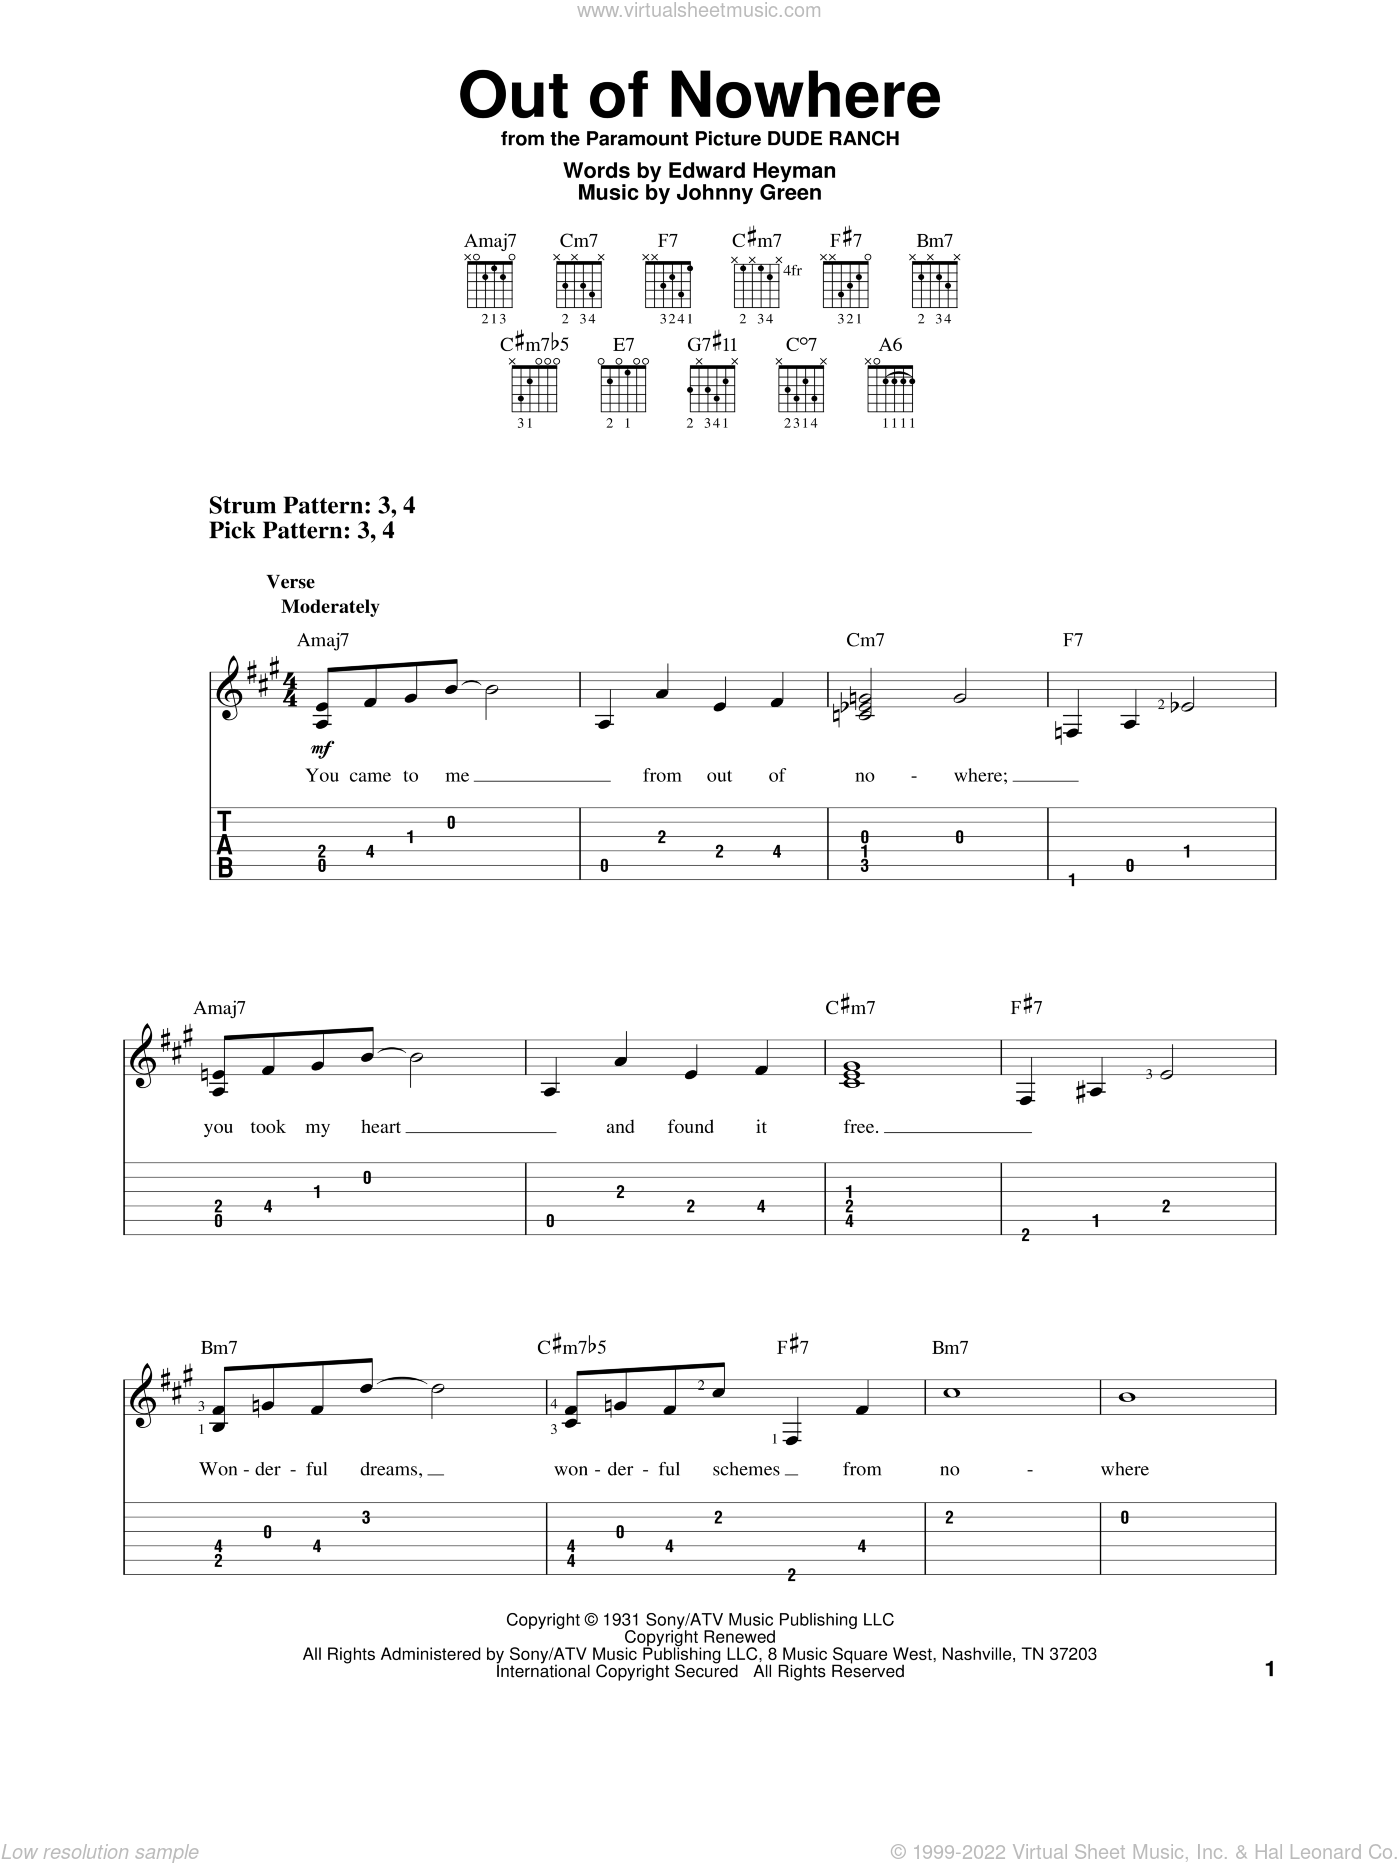 https://cdn3.virtualsheetmusic.com/images/first_pages/HL/HL-177595First_BIG_1.png